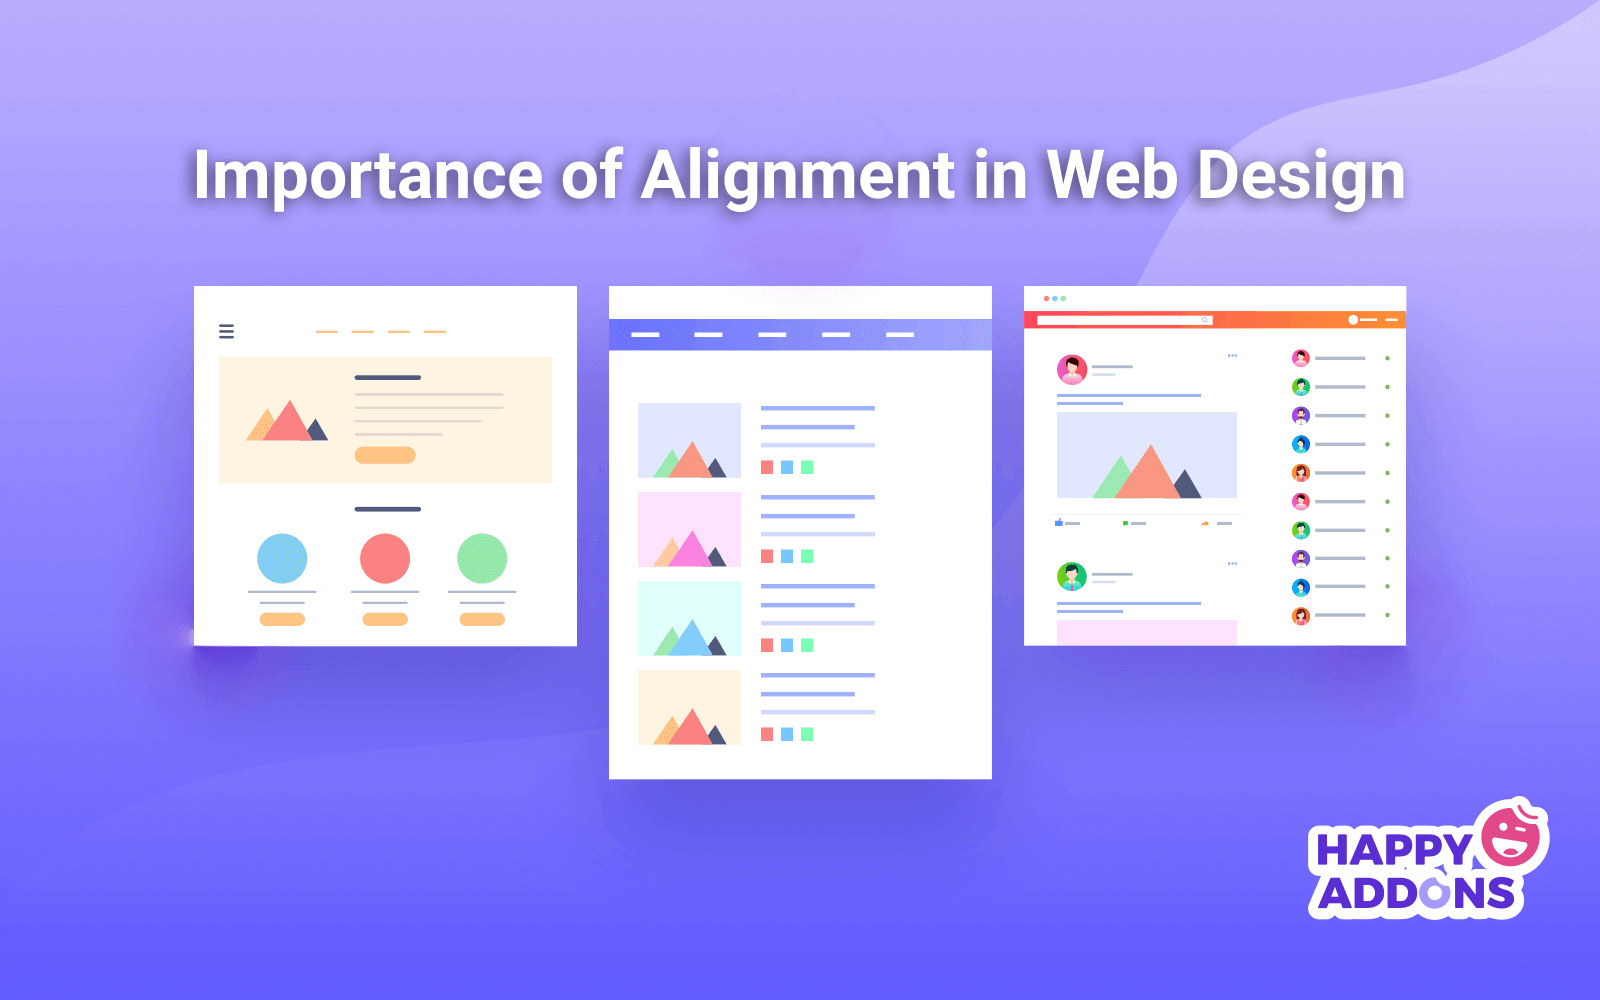 Importance of Alignment in Web Design